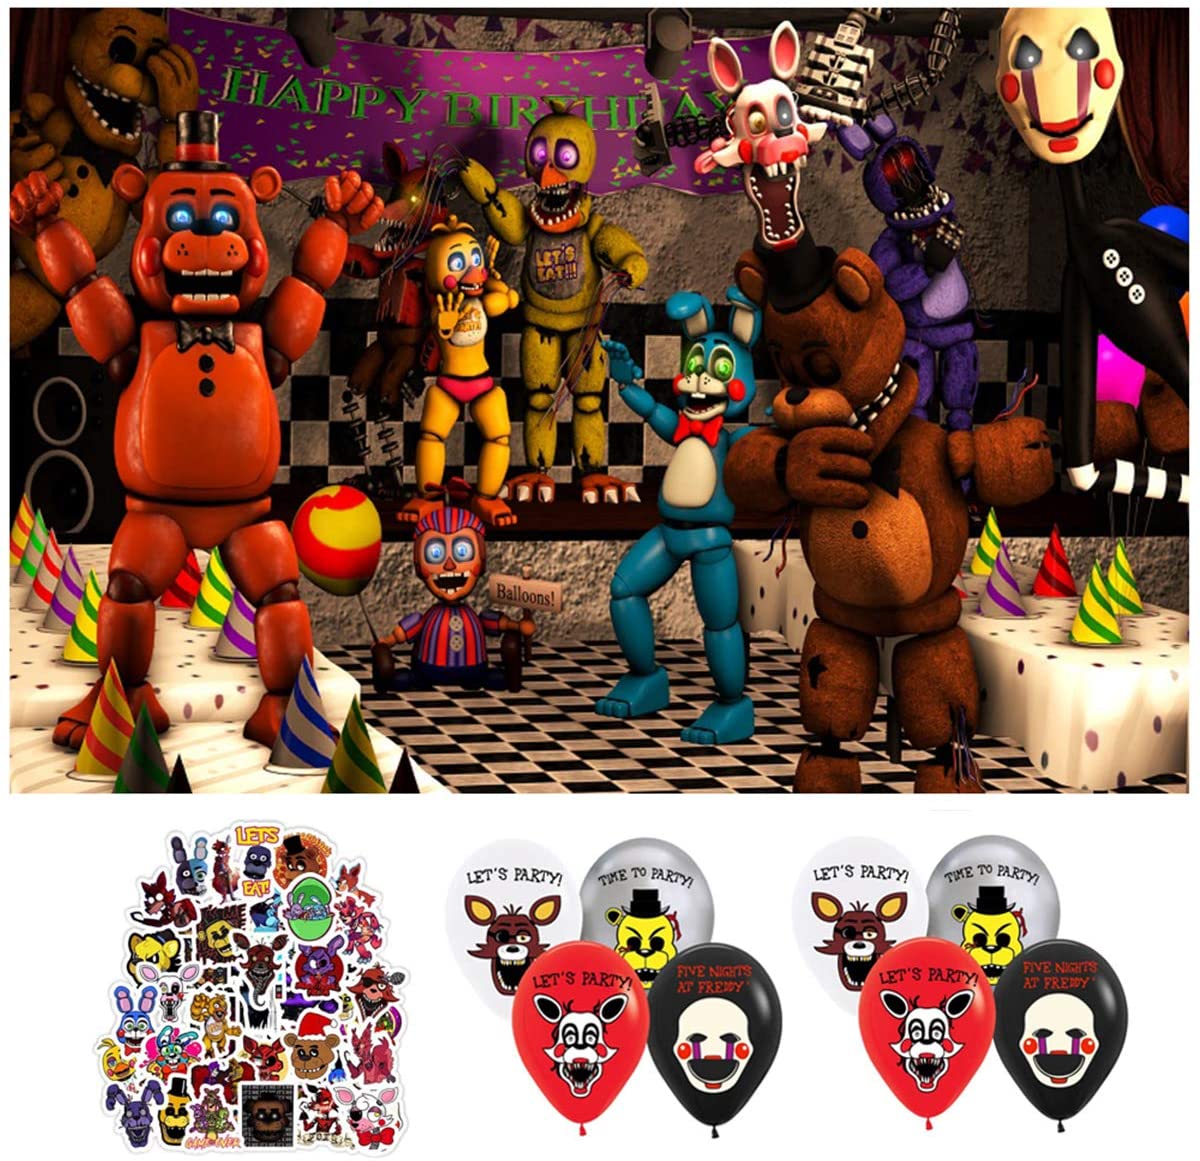 Five Nights at Freddys Birthday Party Decorations Backdrop, Party